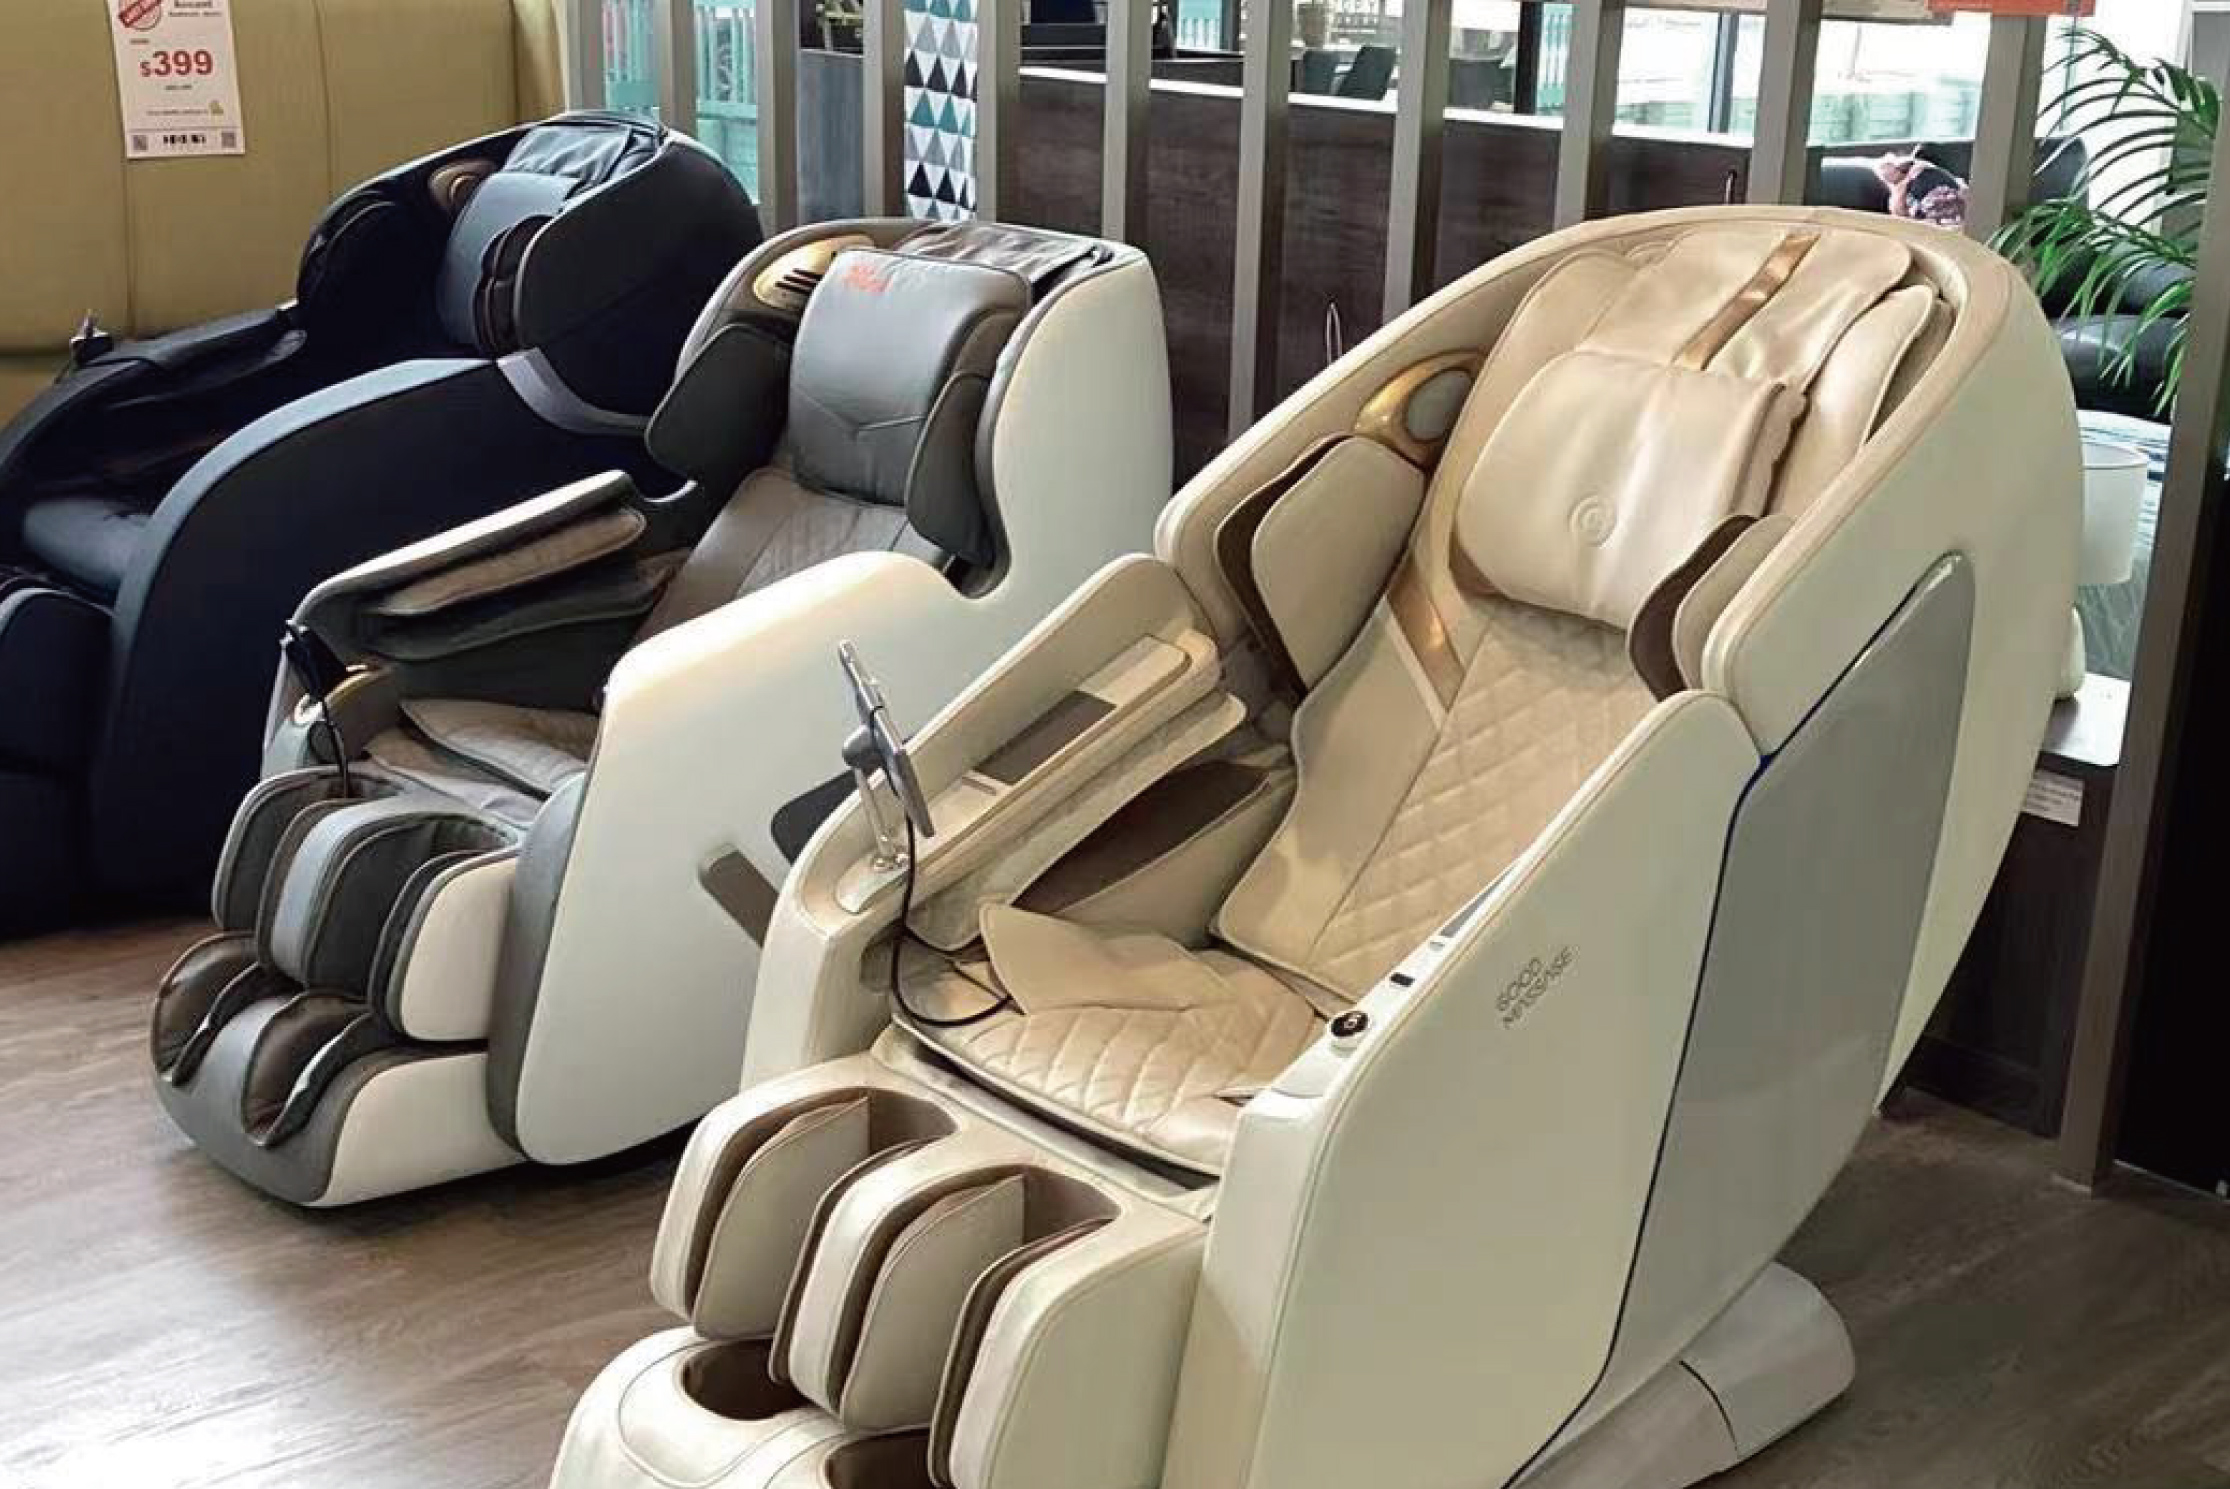 What's a Small Massage Chair? Here's Your 2022 Guide!